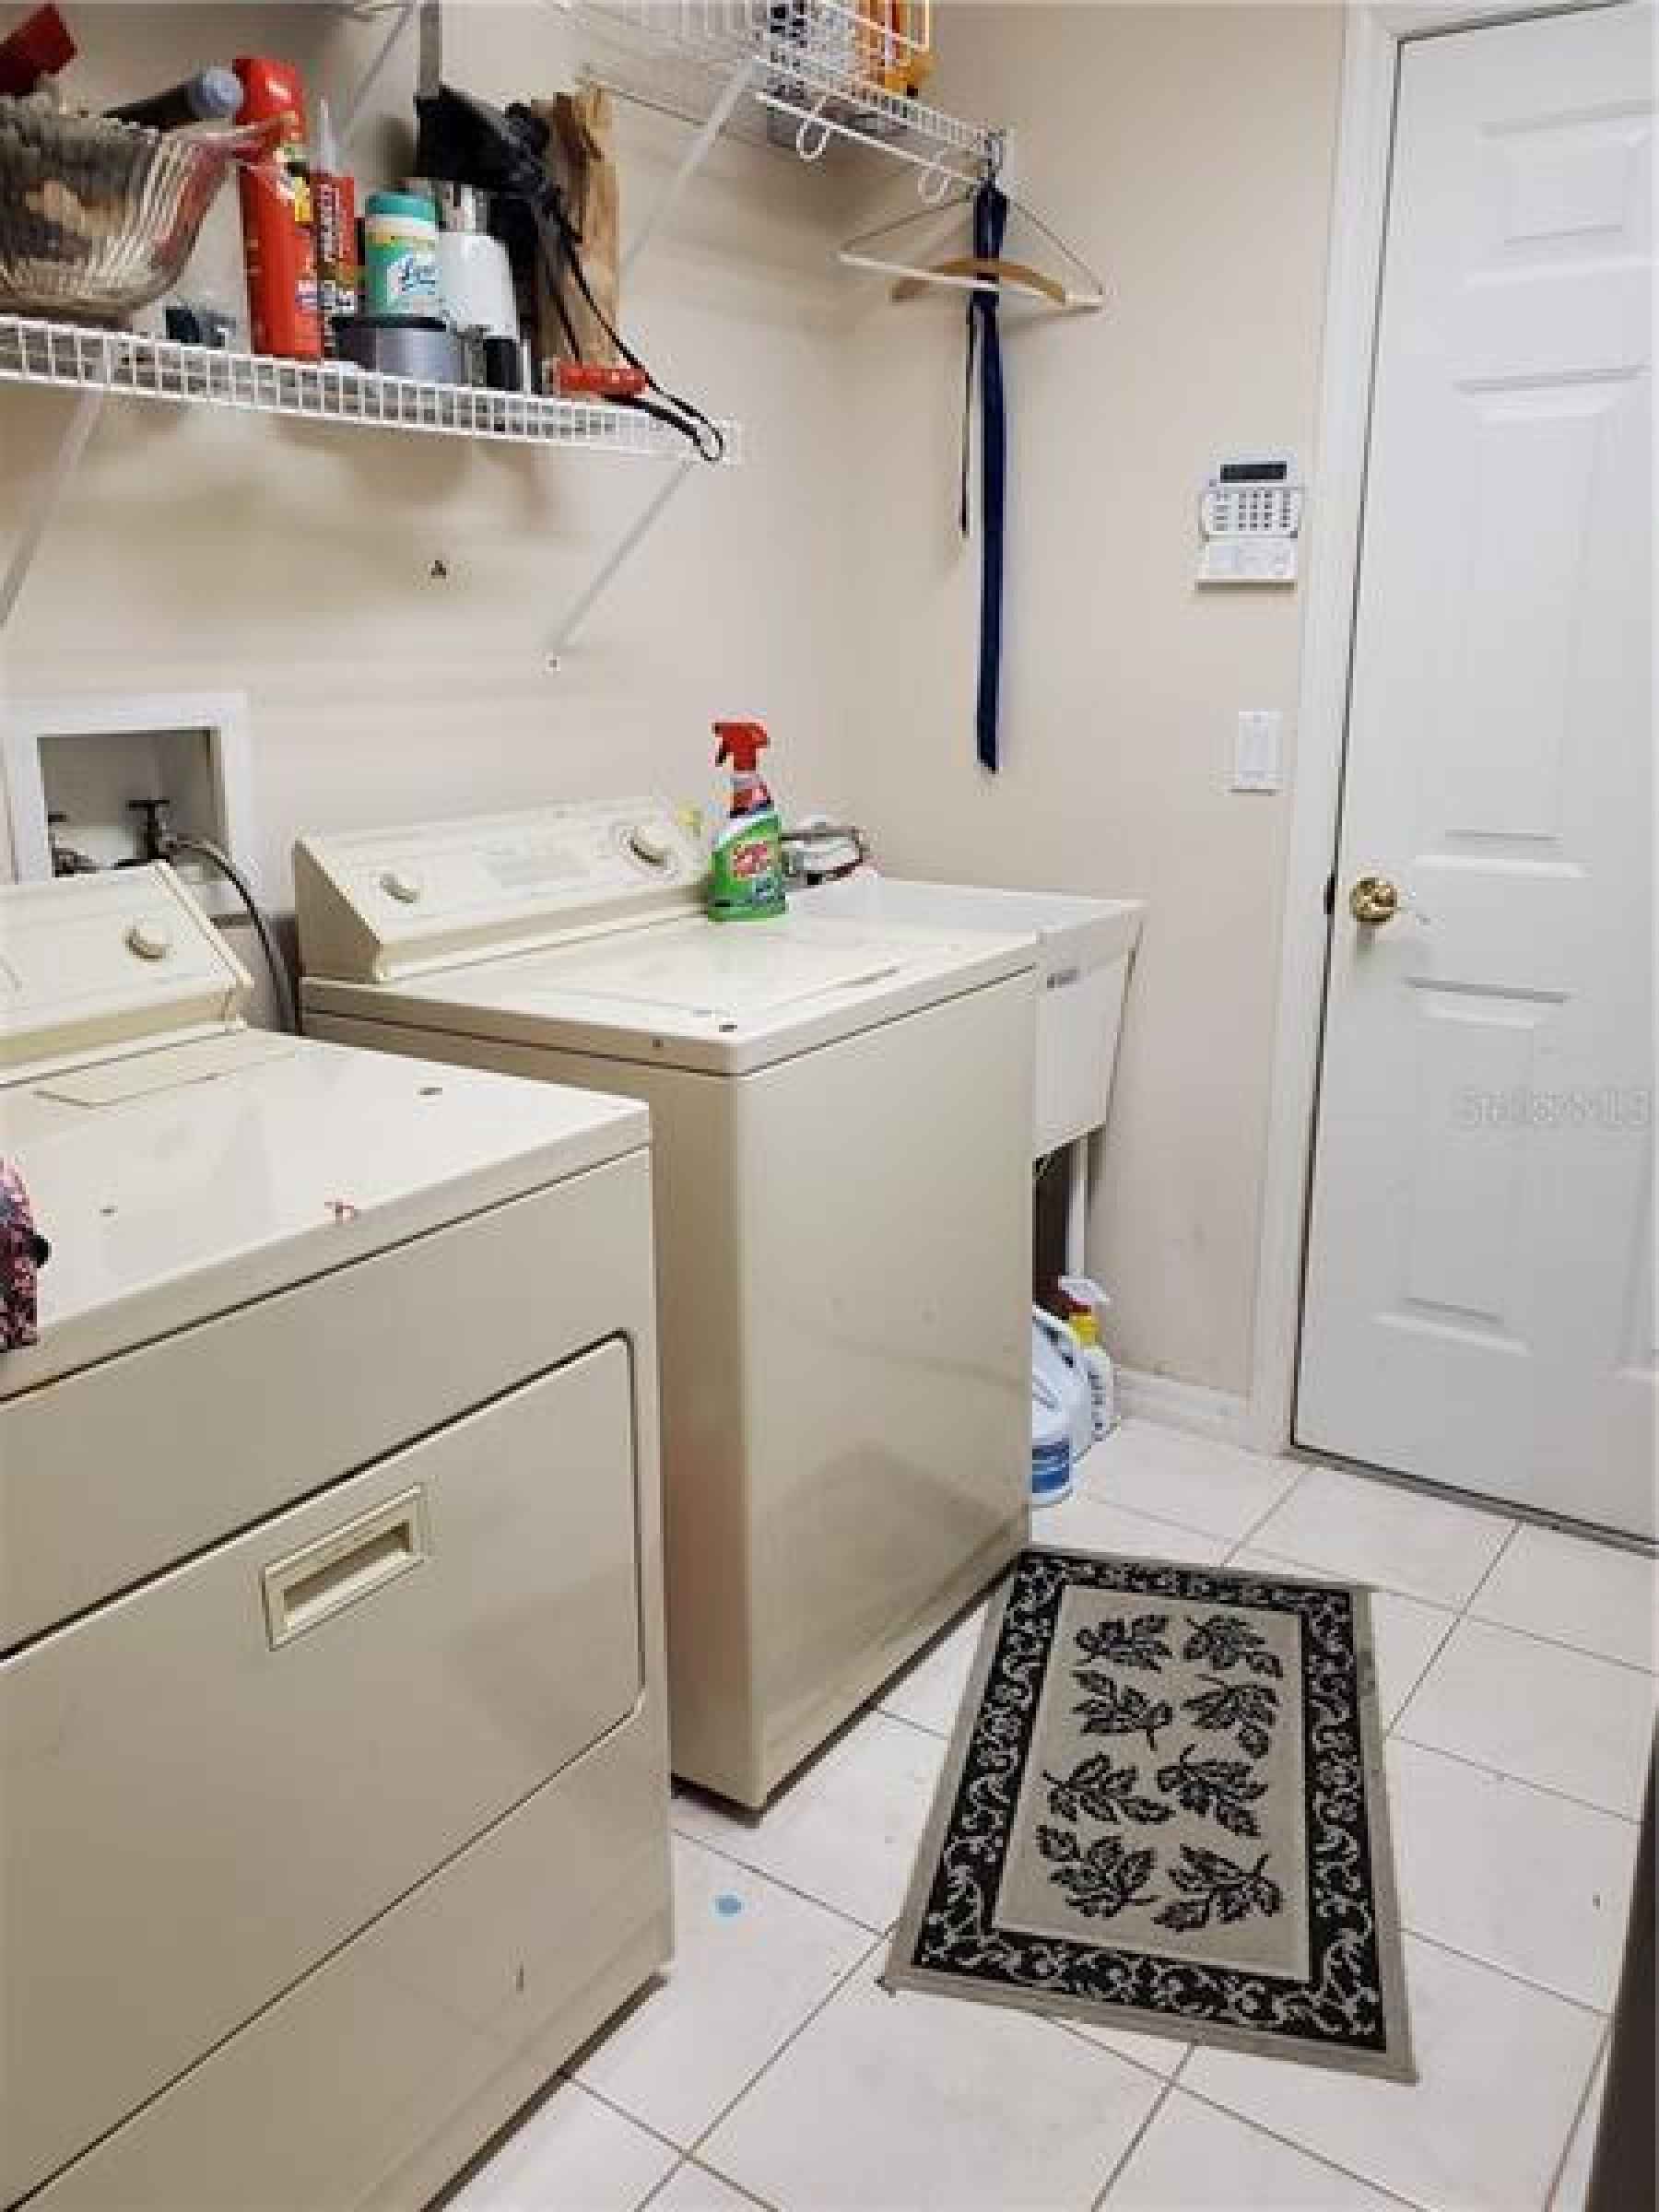 Laundry Room with washer/dryer, sink and racks. Door leads to 3-car garage